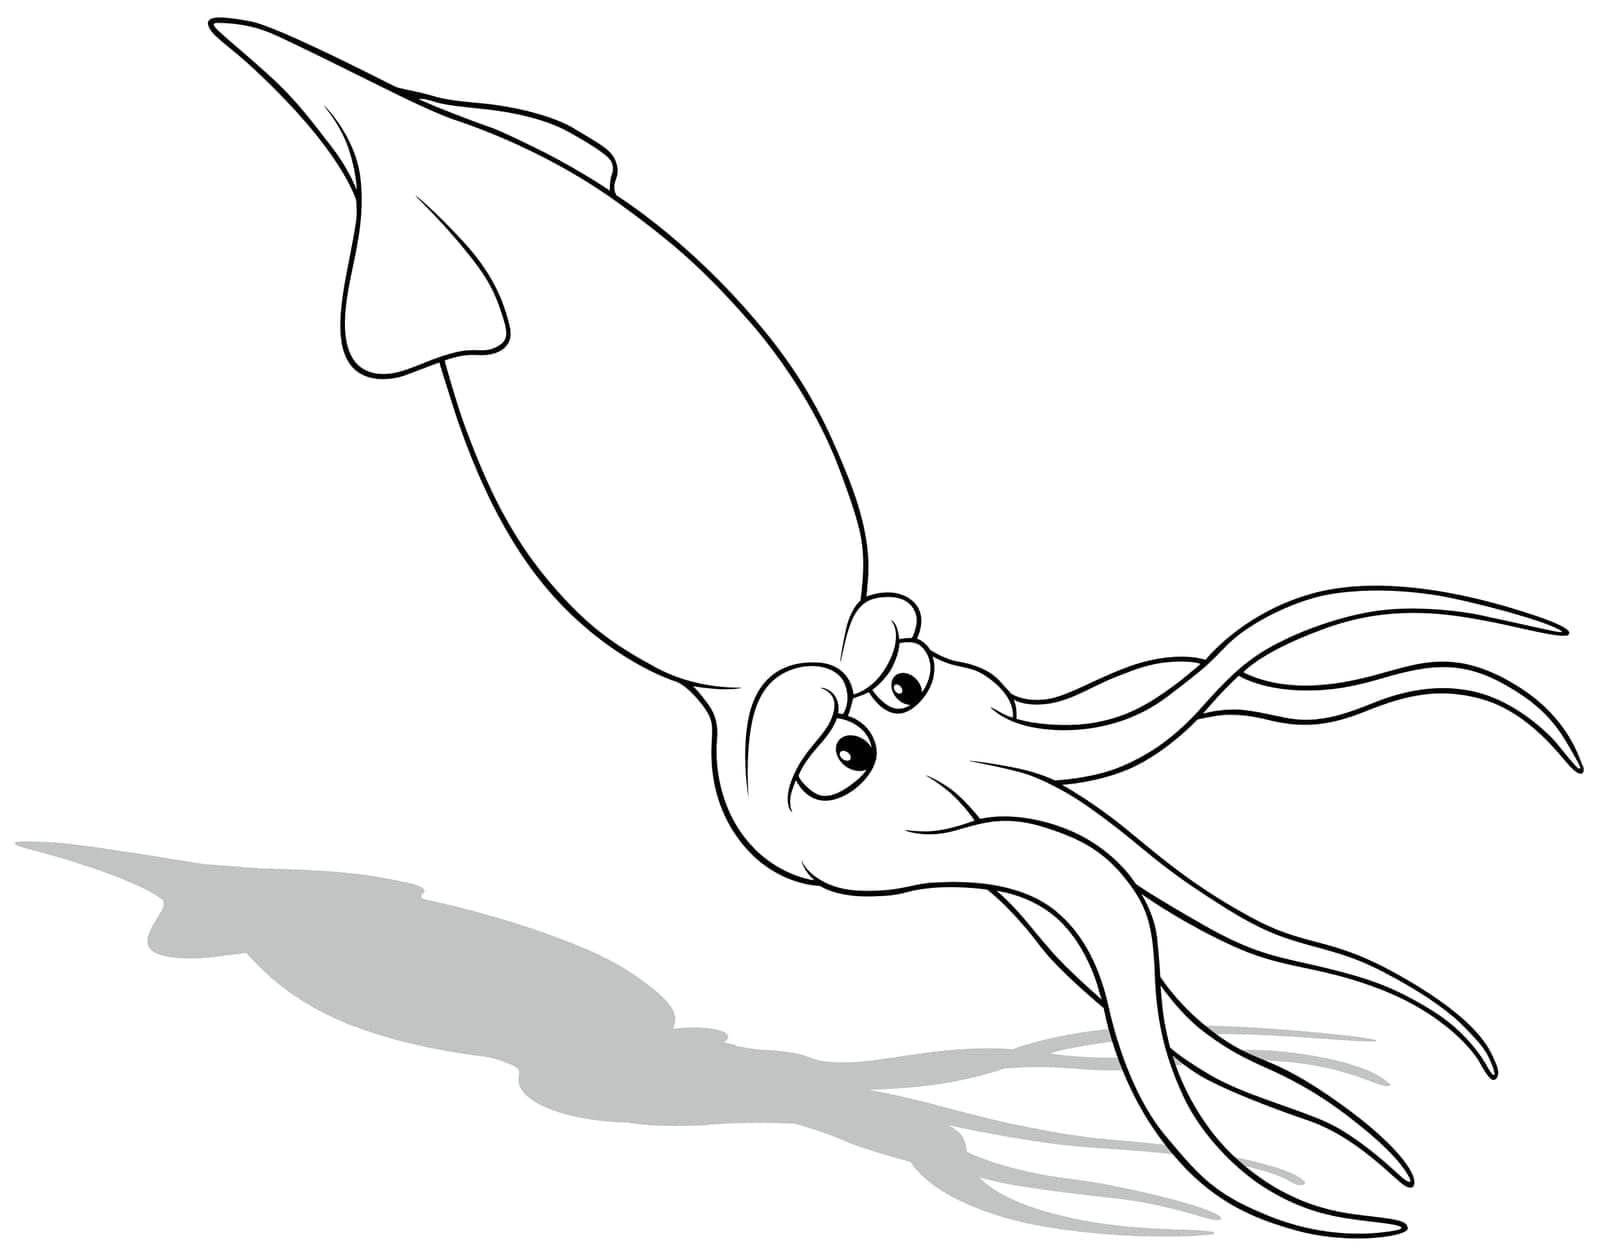 Drawing of a Floating Squid - Cartoon Illustration Isolated on White Background, Vector